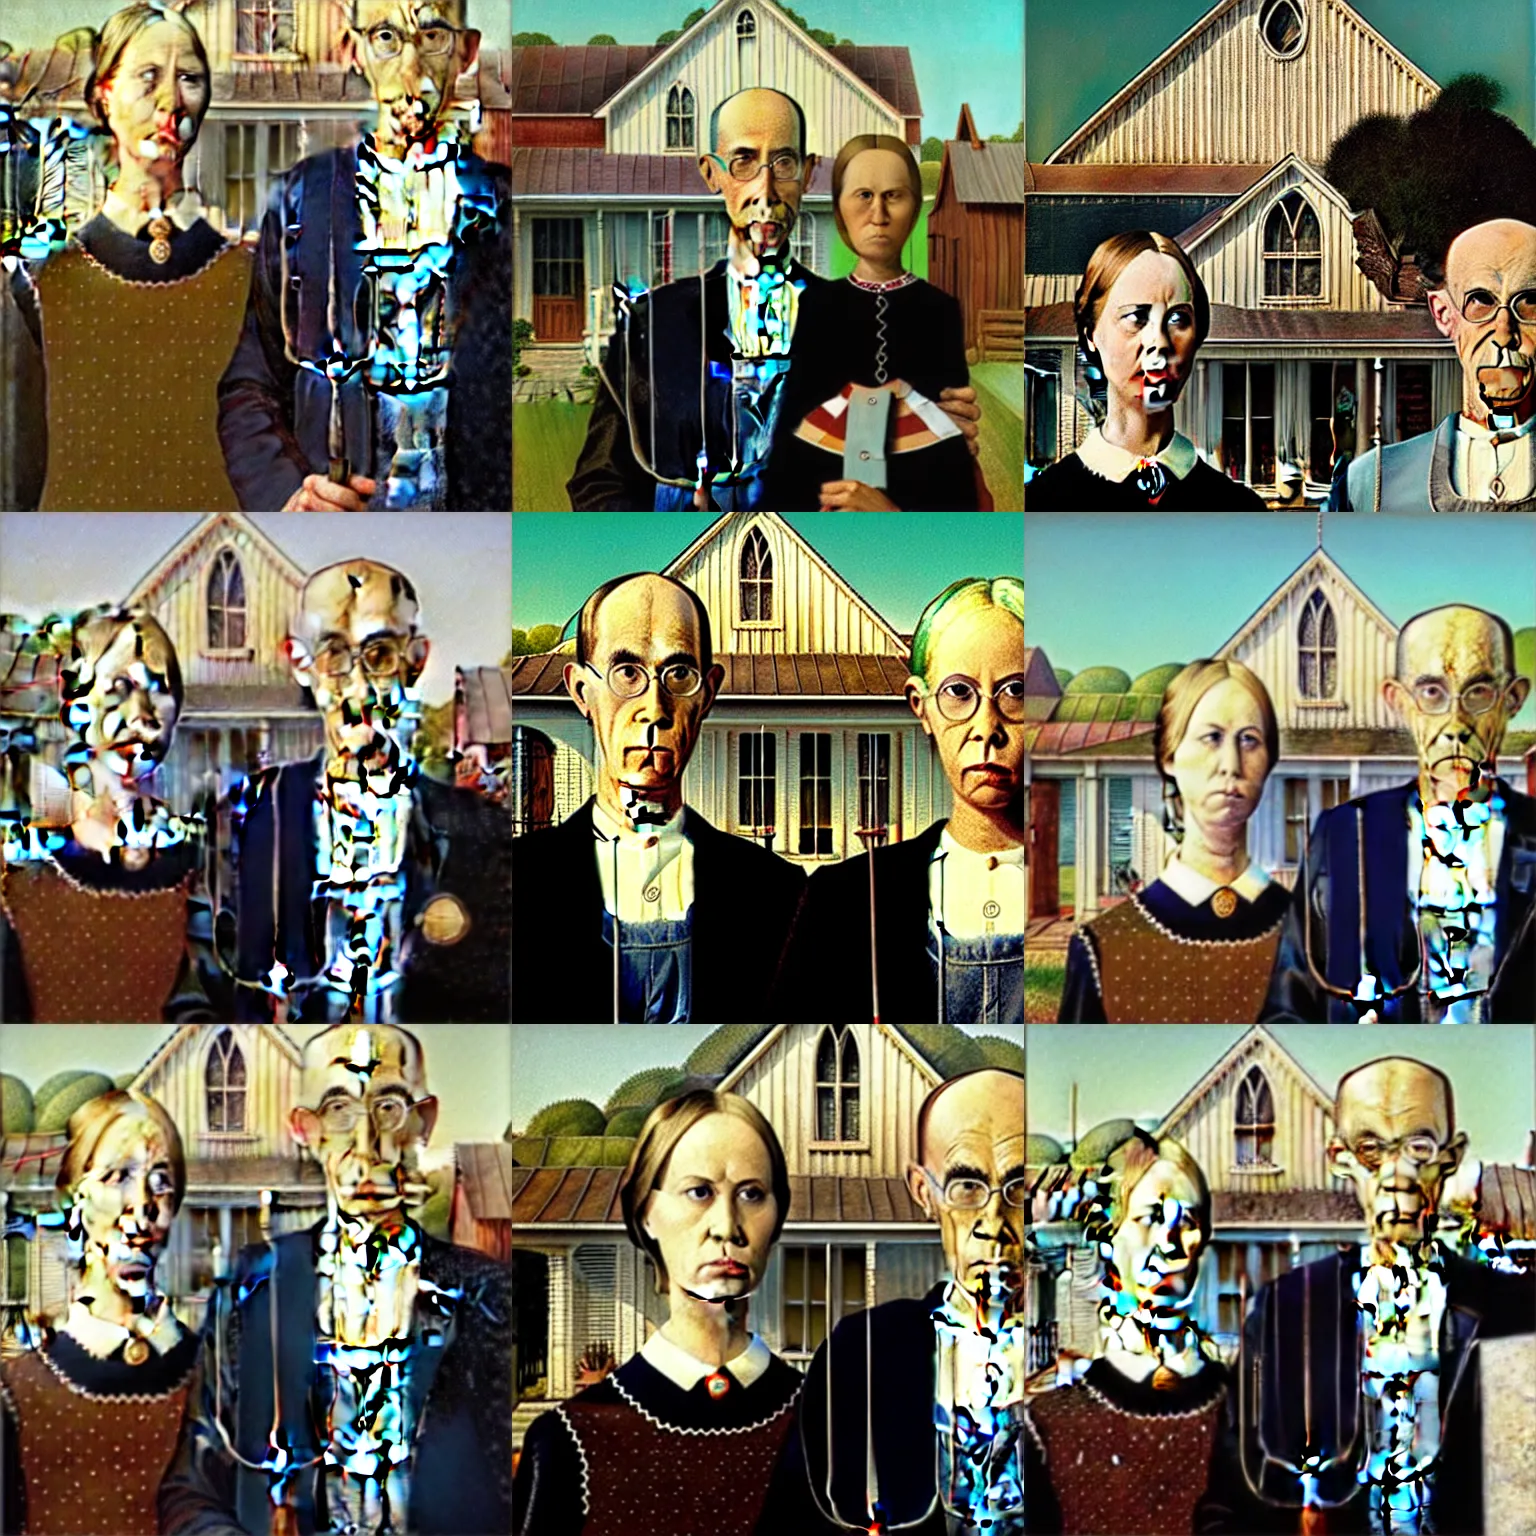 Prompt: american gothic by grant wood in the style of a rap video